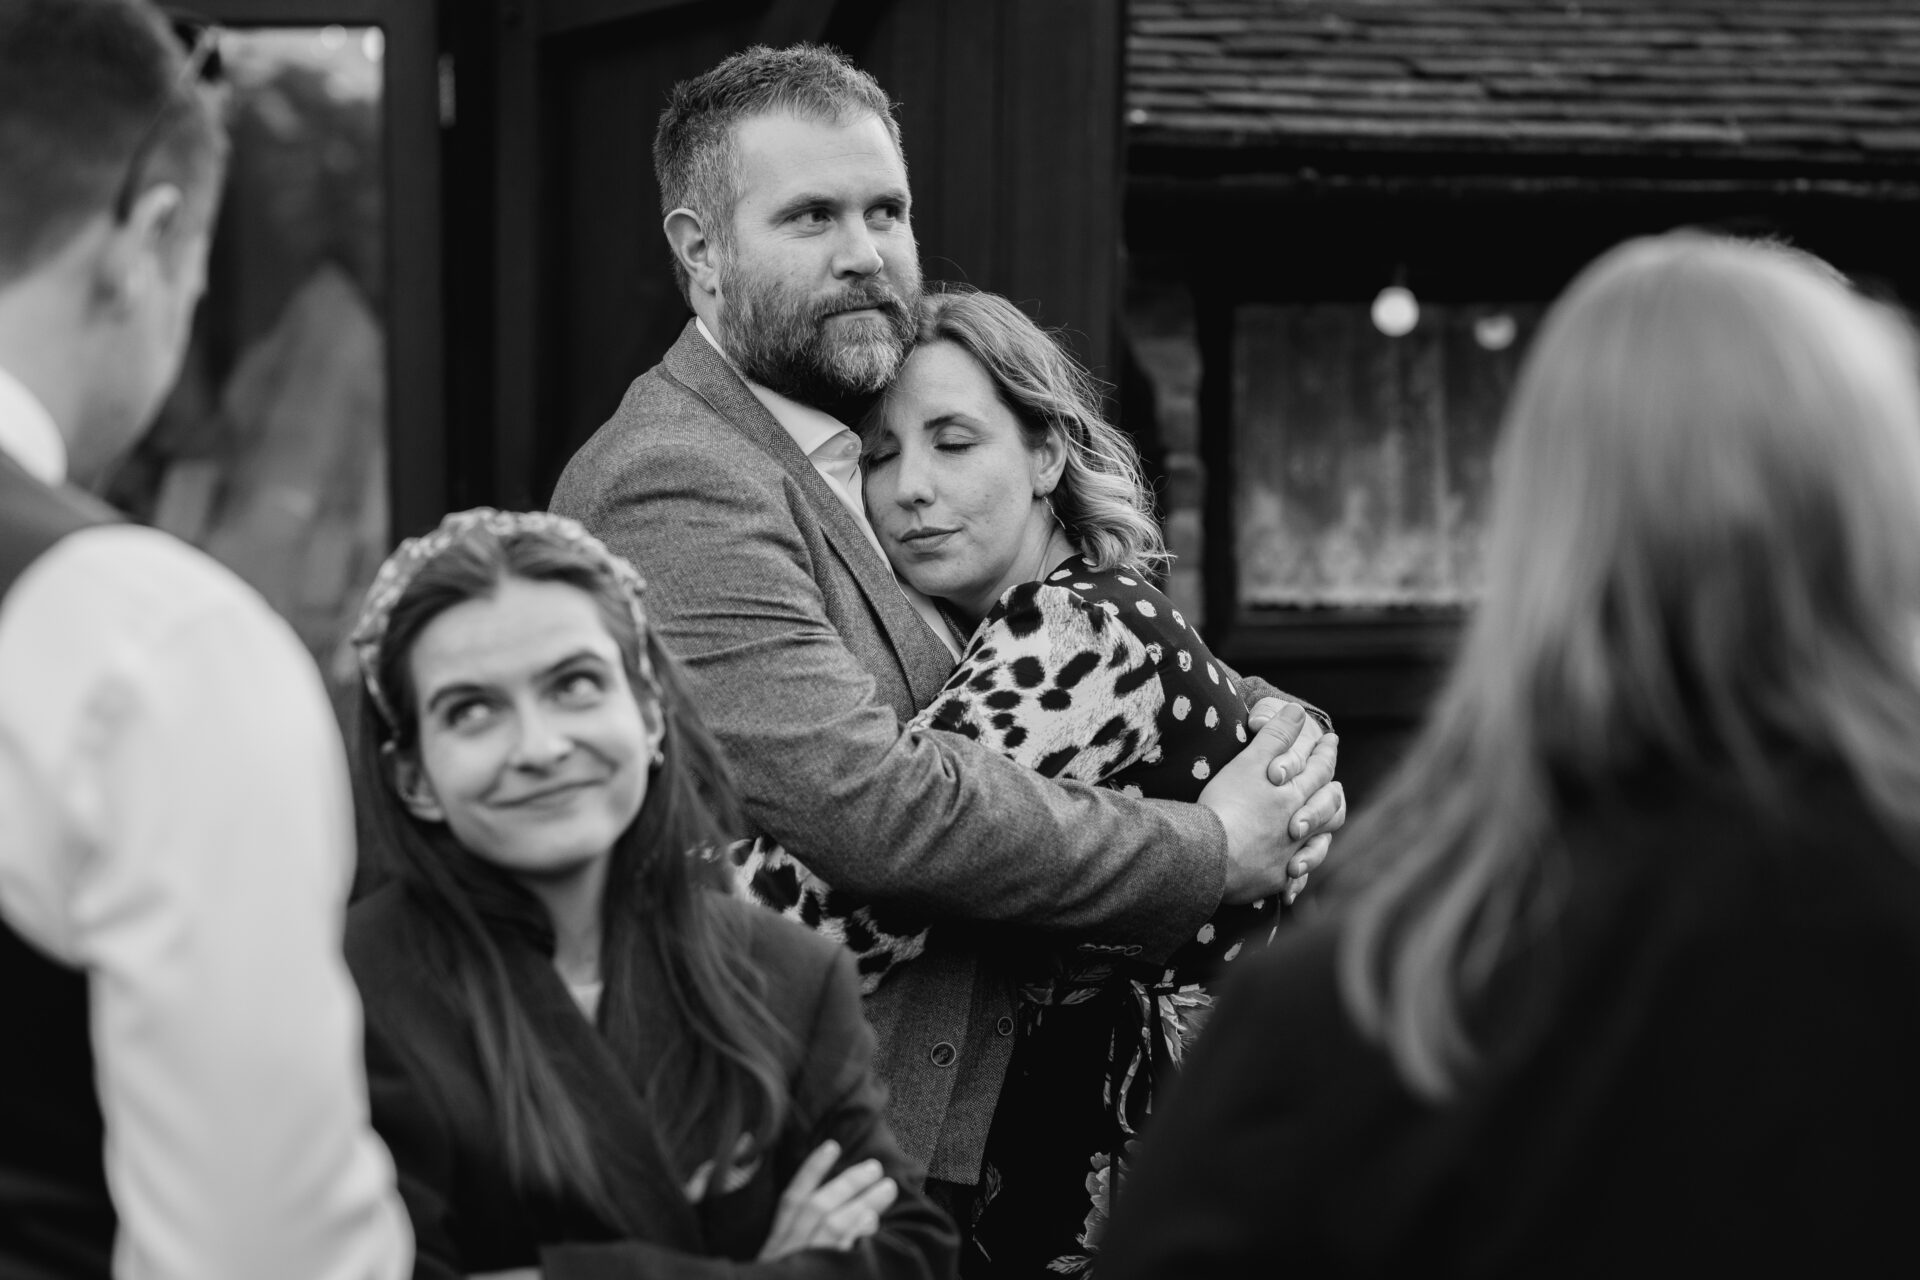 Wedding guests share an embrace at Old Luxters Barn wedding venue in Oxfordshire